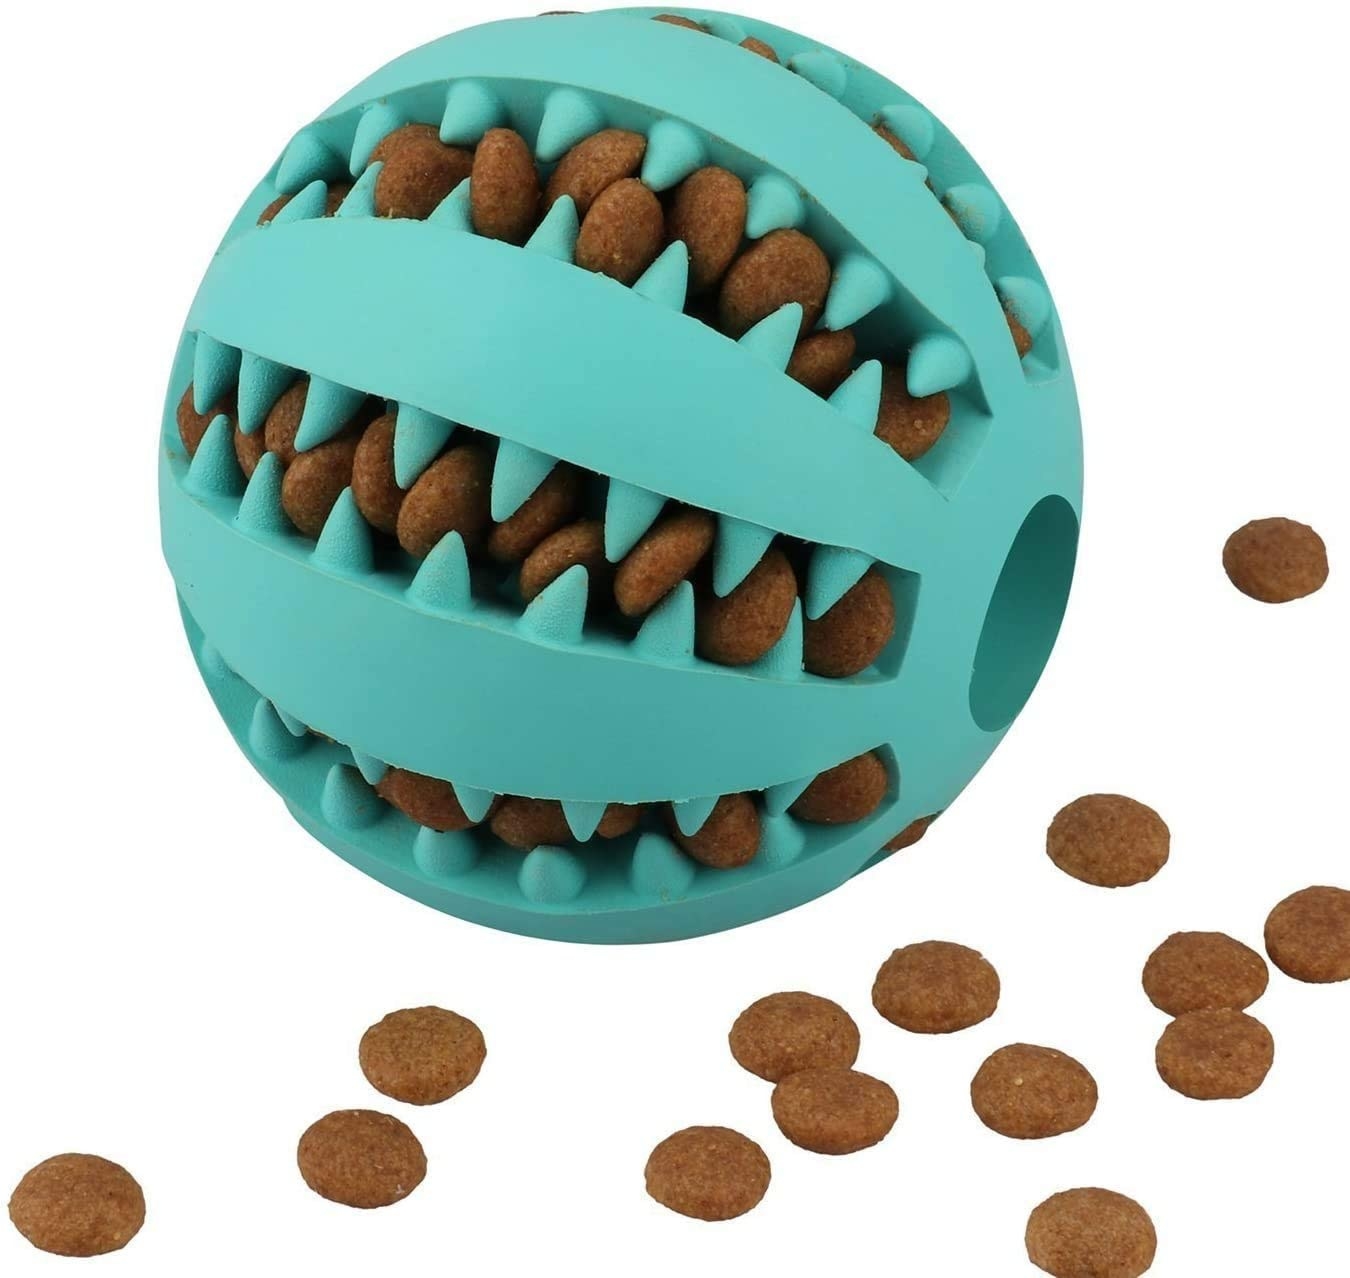 A ball filled with treats